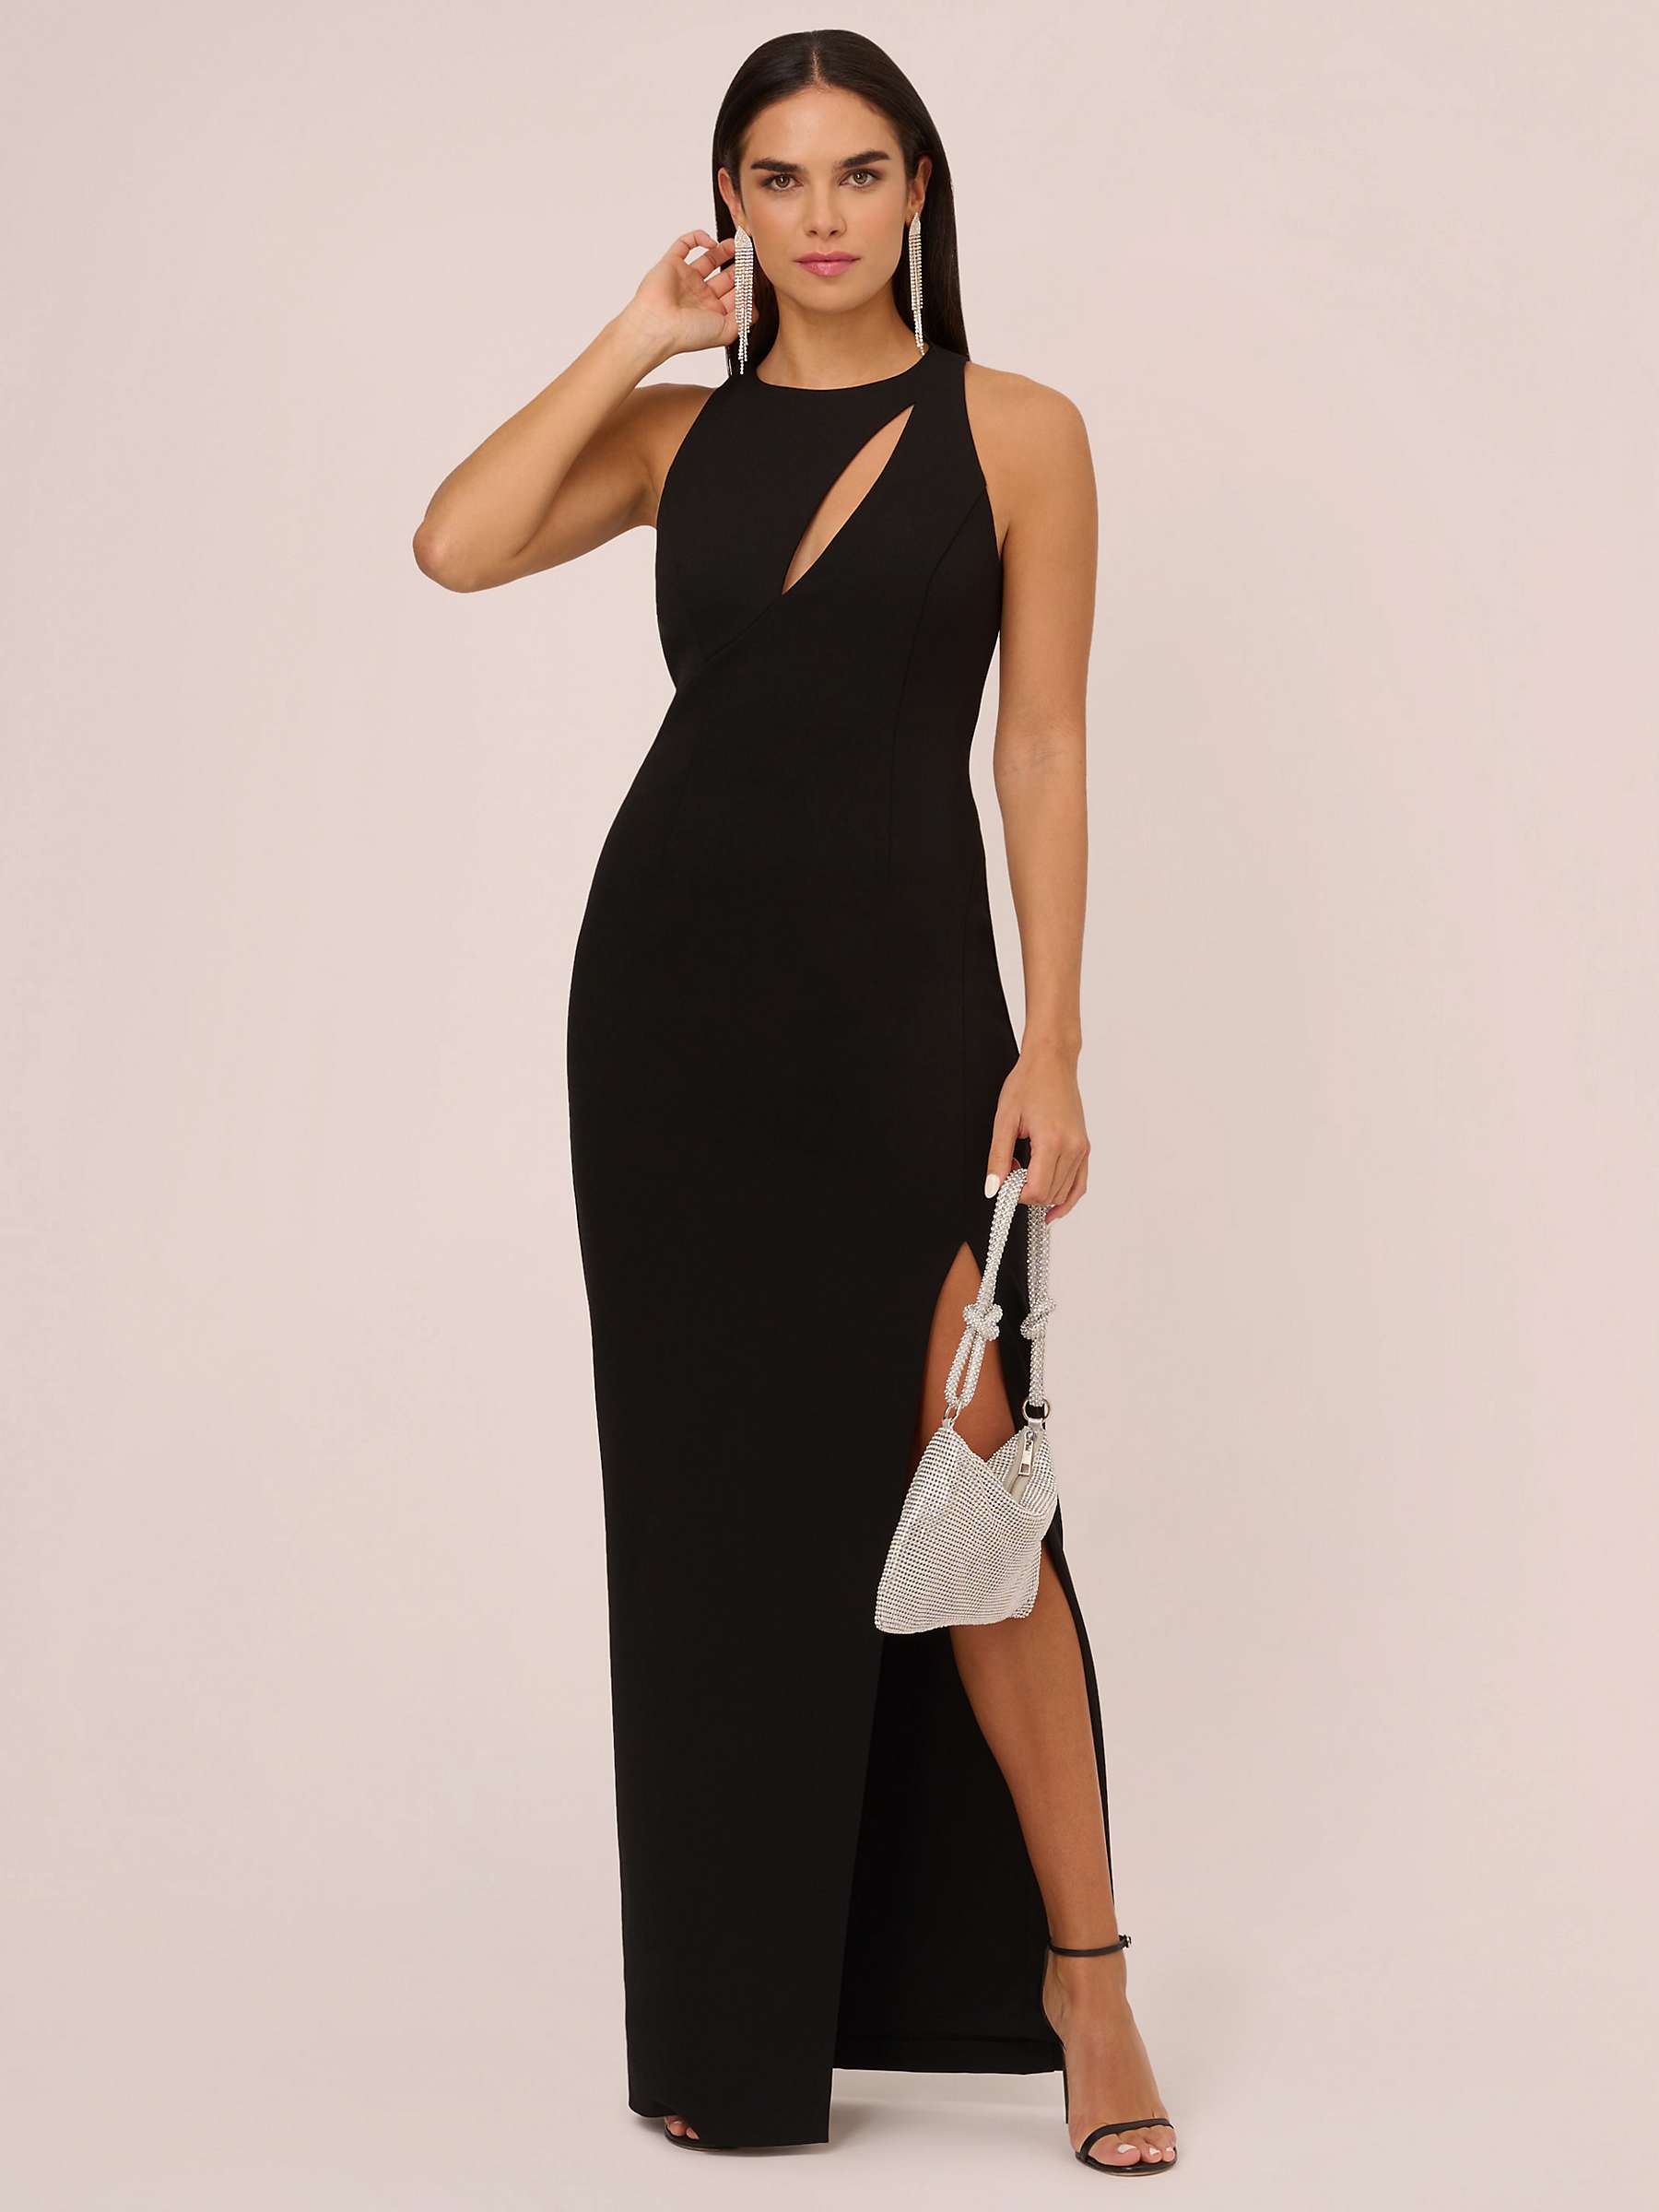 Buy Adrianna Papell Aidan by Adrianna Papell Sleeveless Knit Crepe Gown, Black Online at johnlewis.com